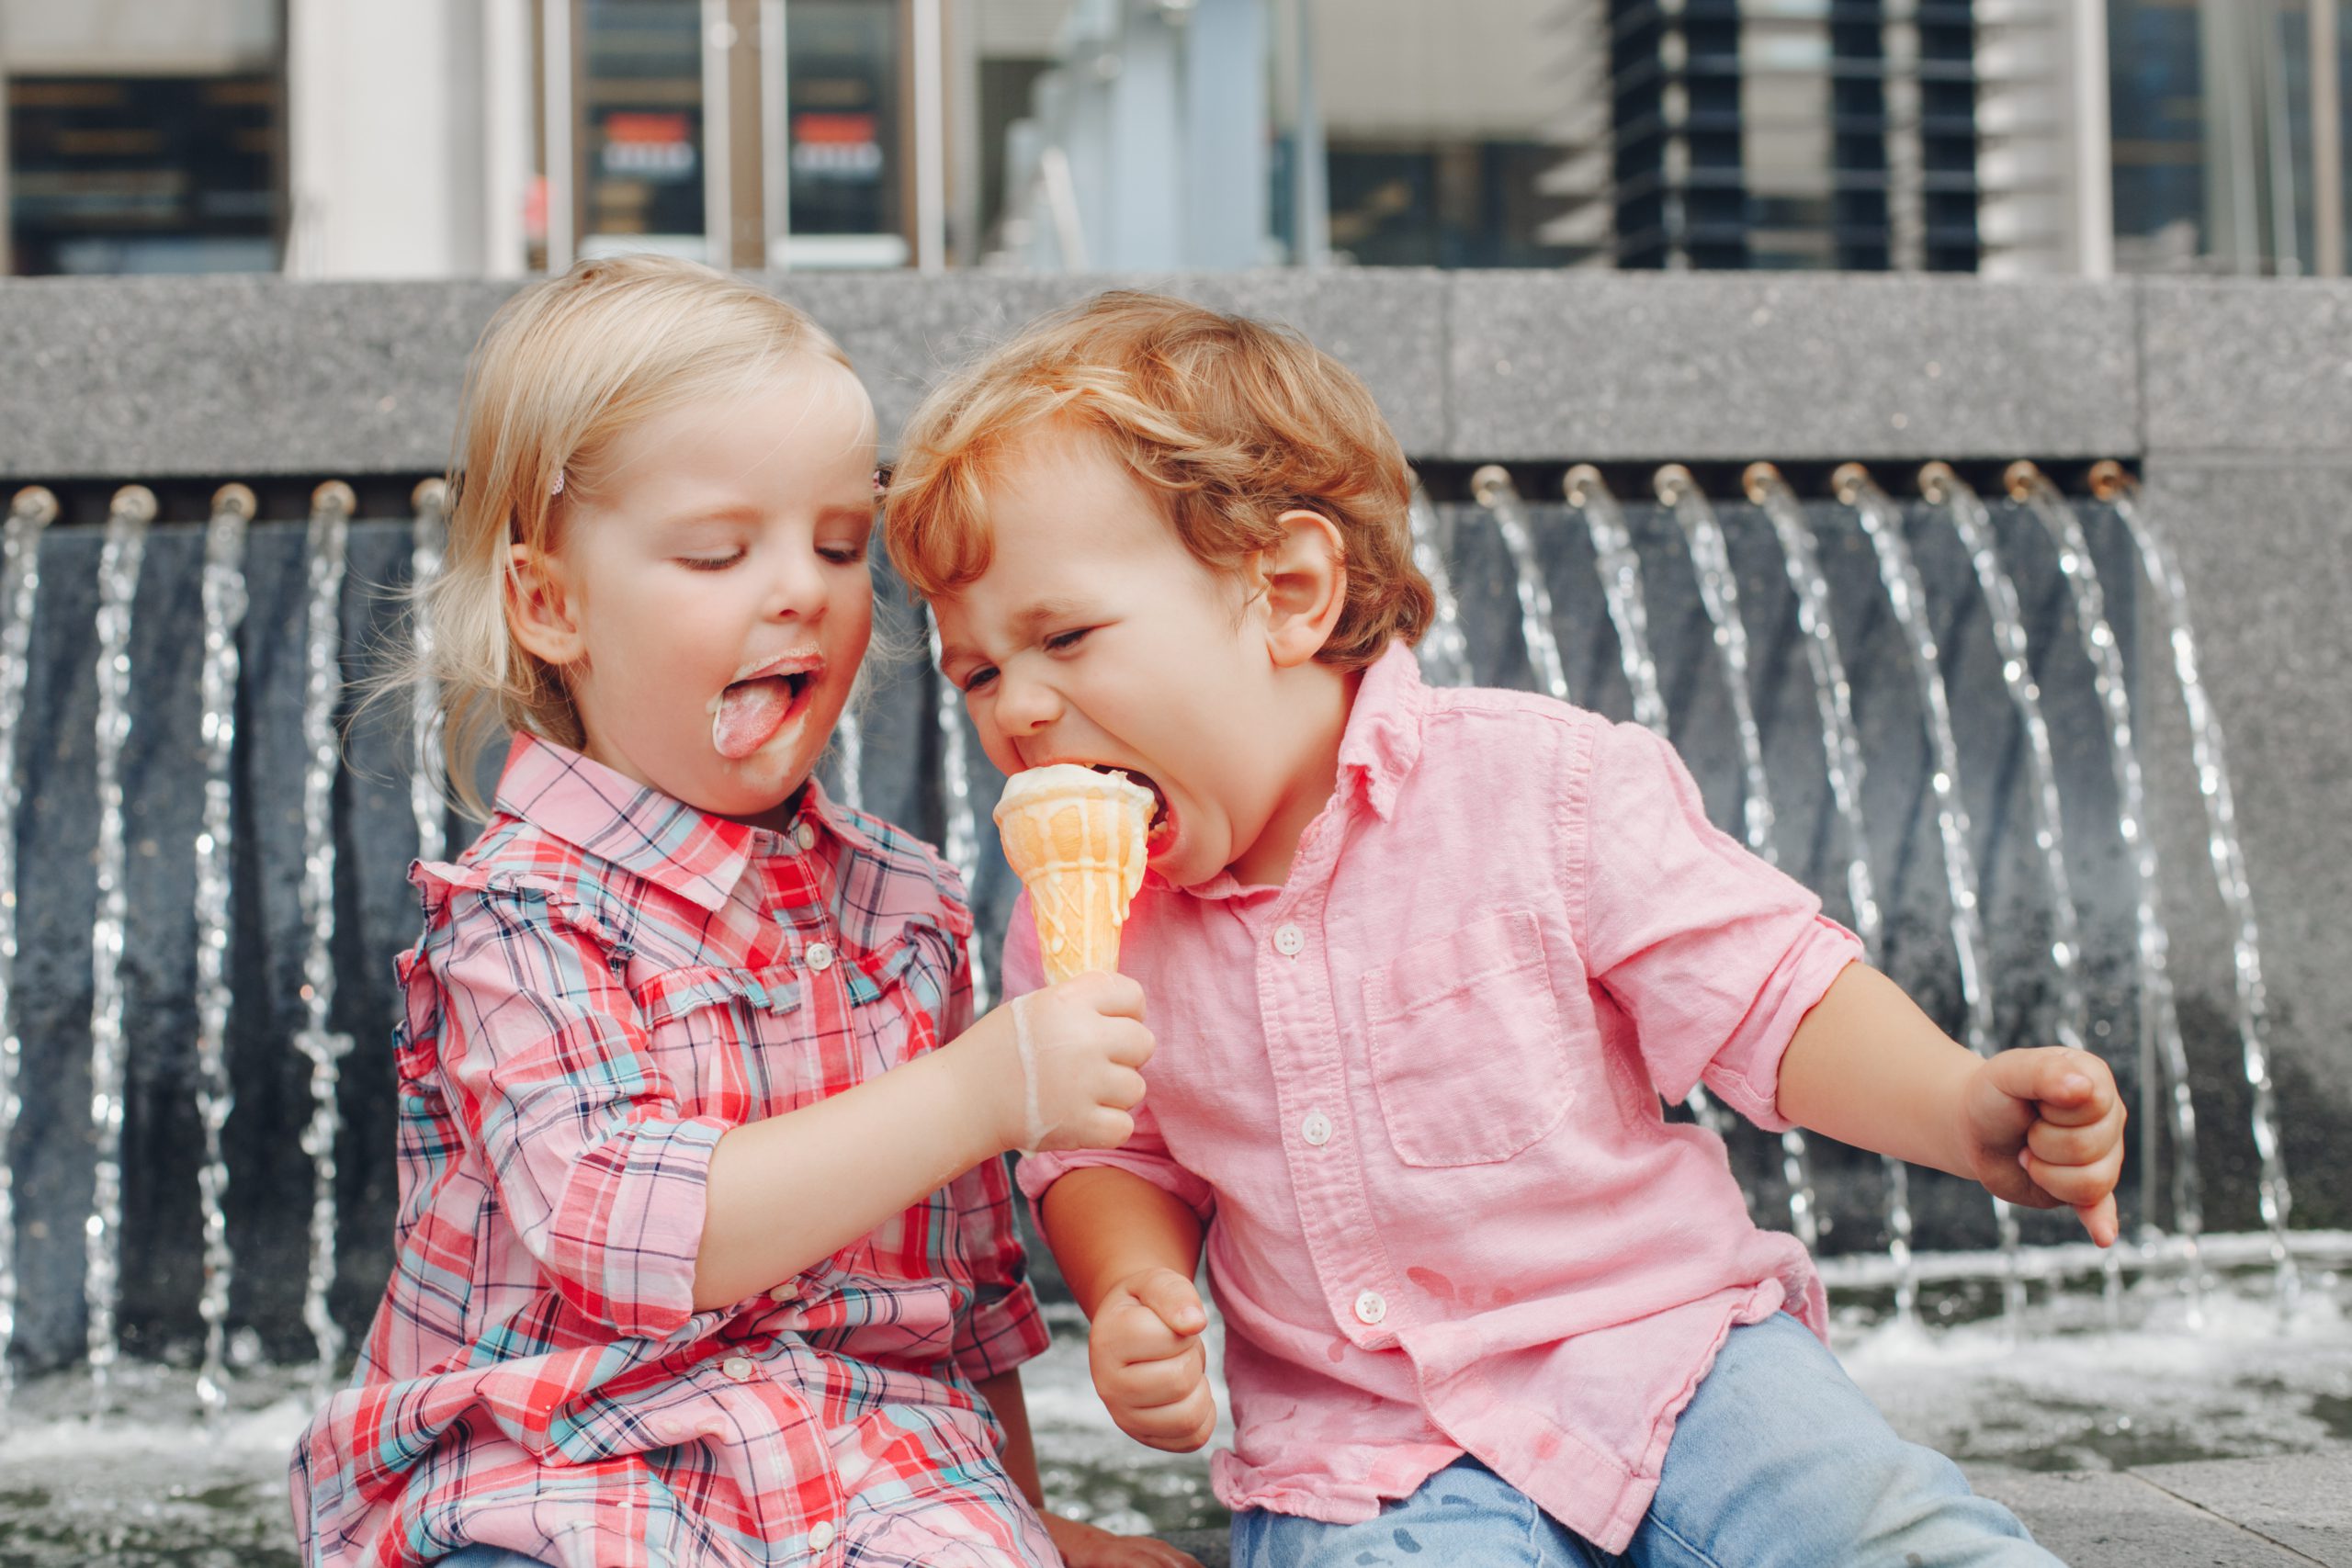 Two young children share a melting ice cream cone.